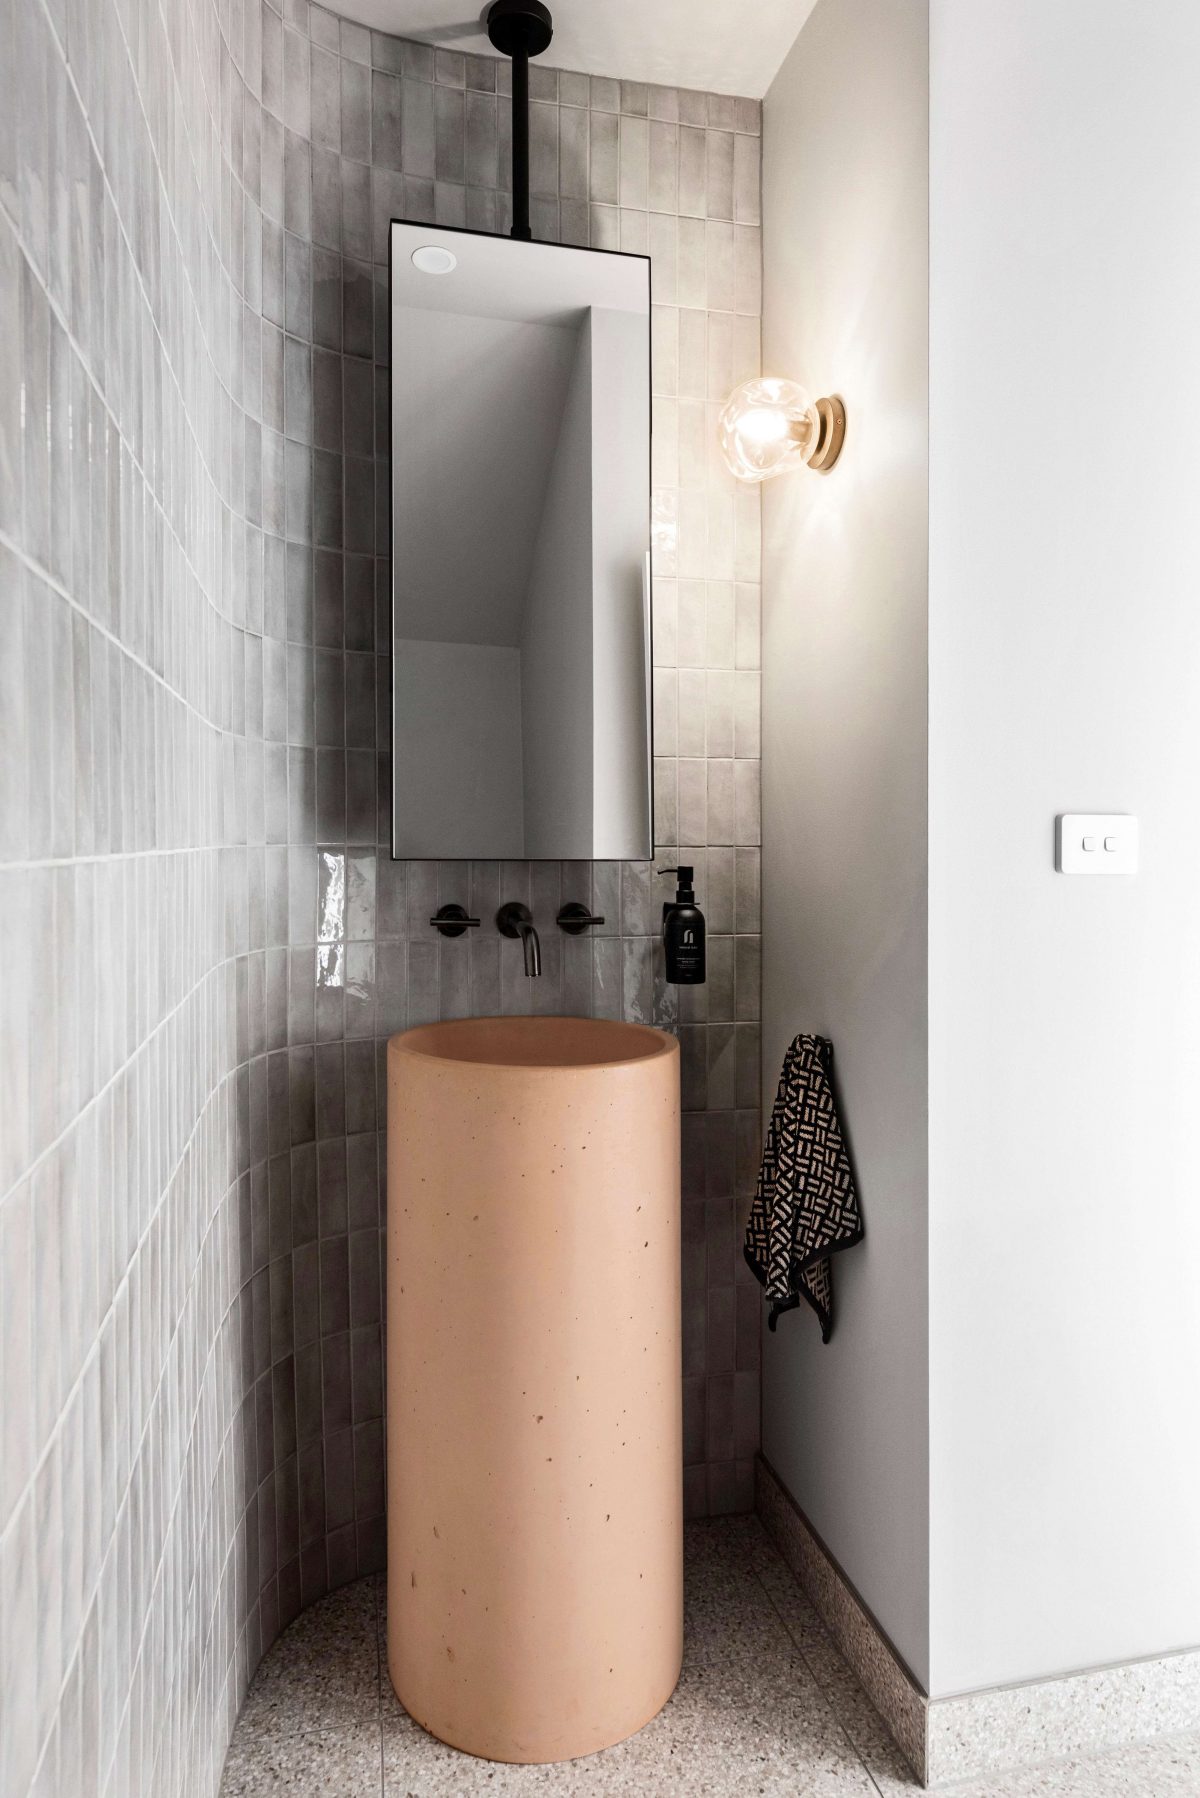 Powder Room Interior Design Melbourne Curved Tiled Feature Wall Hanging Mirror Pink Concrete Pillar Basin